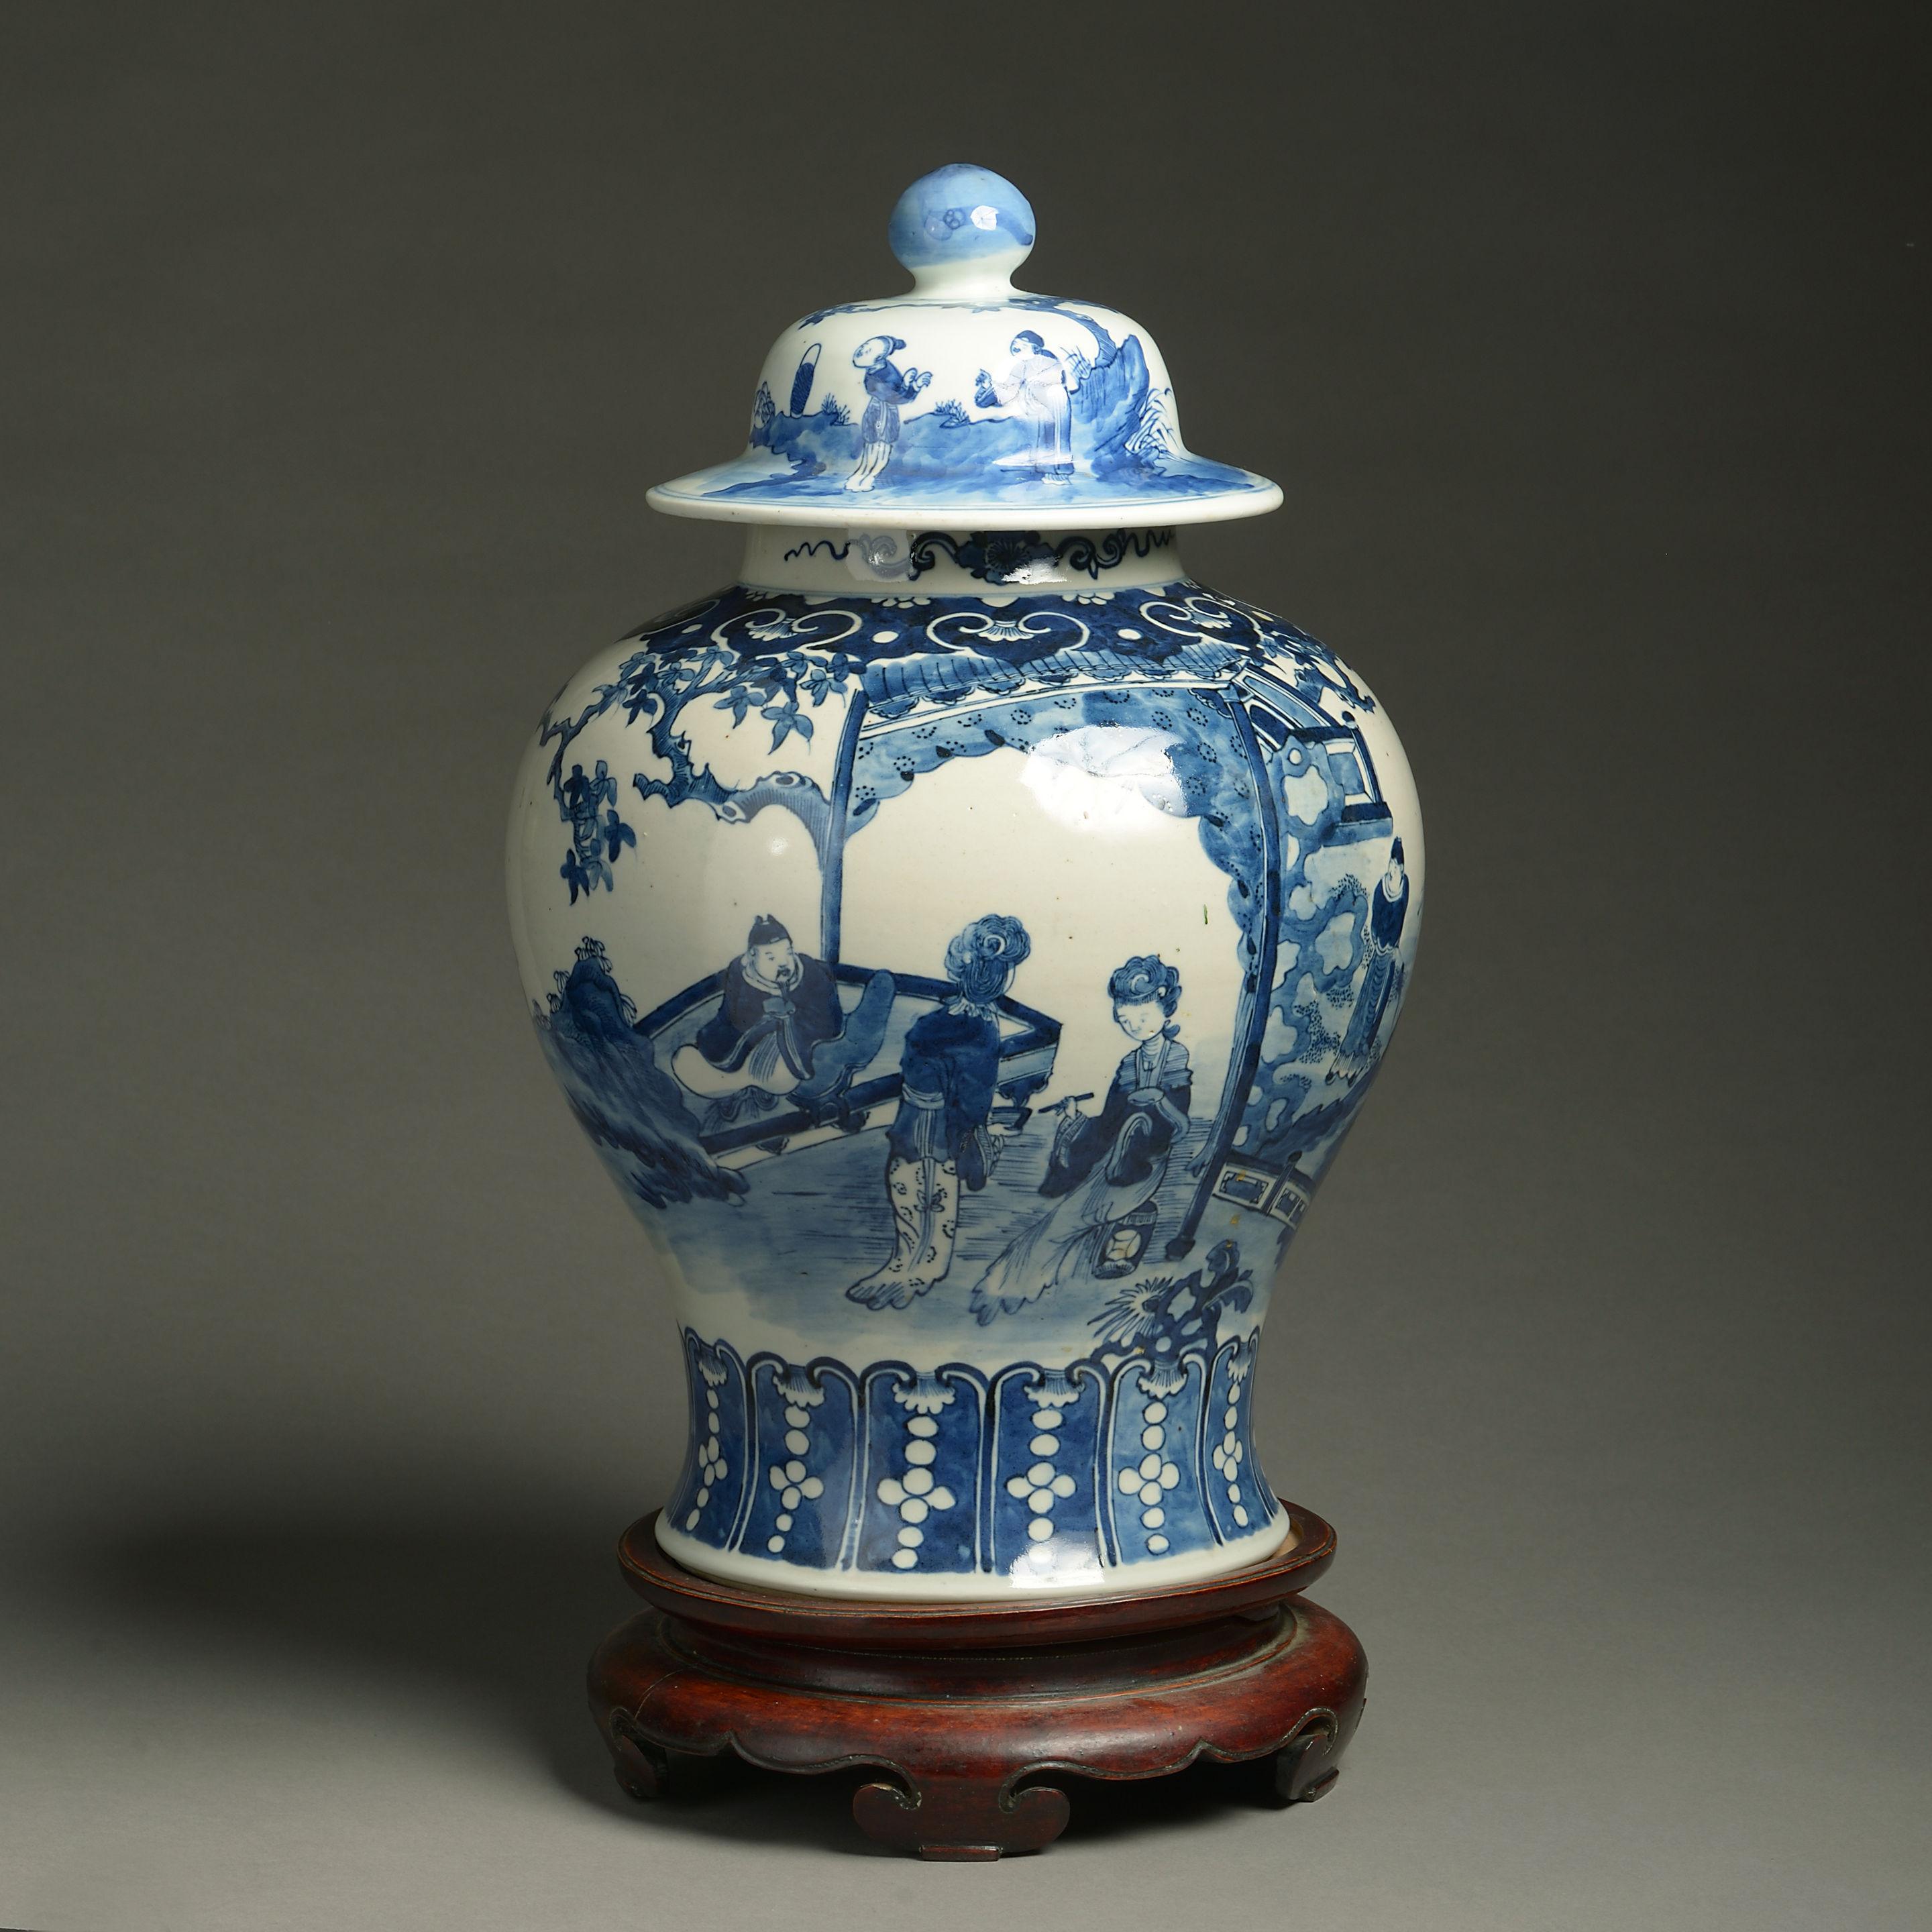 A late 19th century blue and white glazed baluster form vase and cover, decorated throughout with courtly figurative scenes. 

Late Qing dynasty. 

Together with a carved turned wooden stand. 

Dimensions listed are excluding the base.